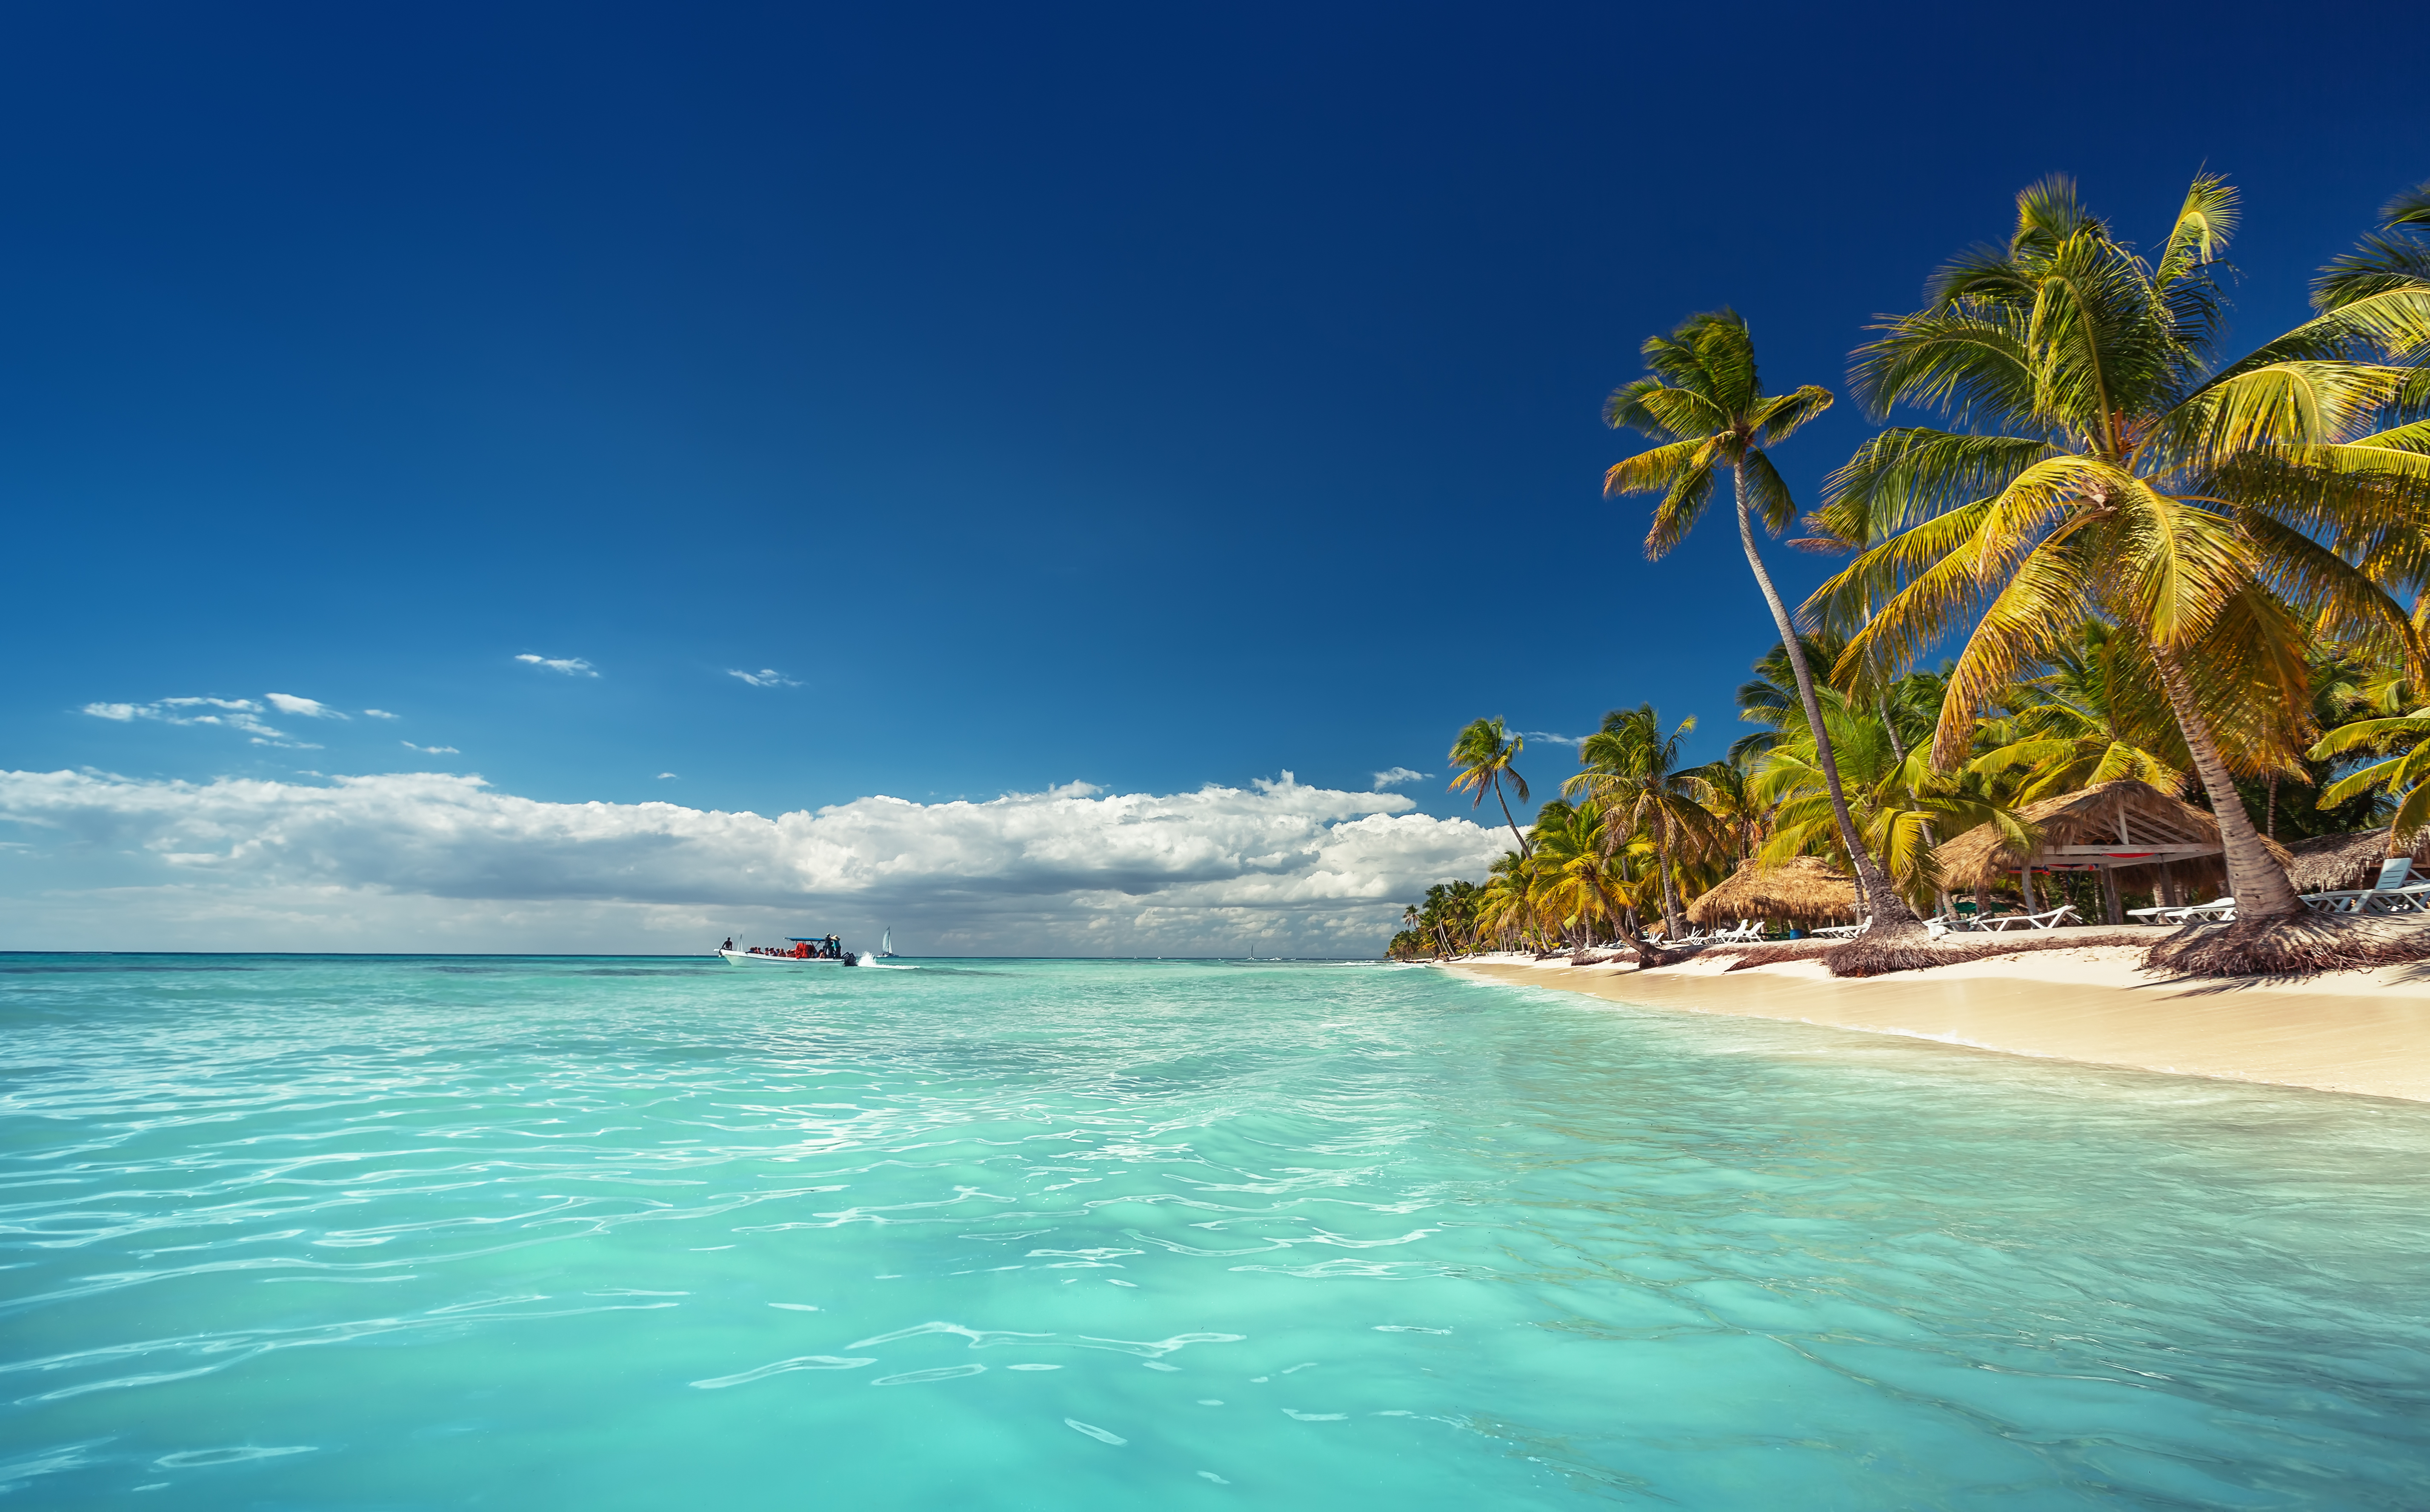 Punta Cana: one of the most complete paradises in the Caribbean - RIU